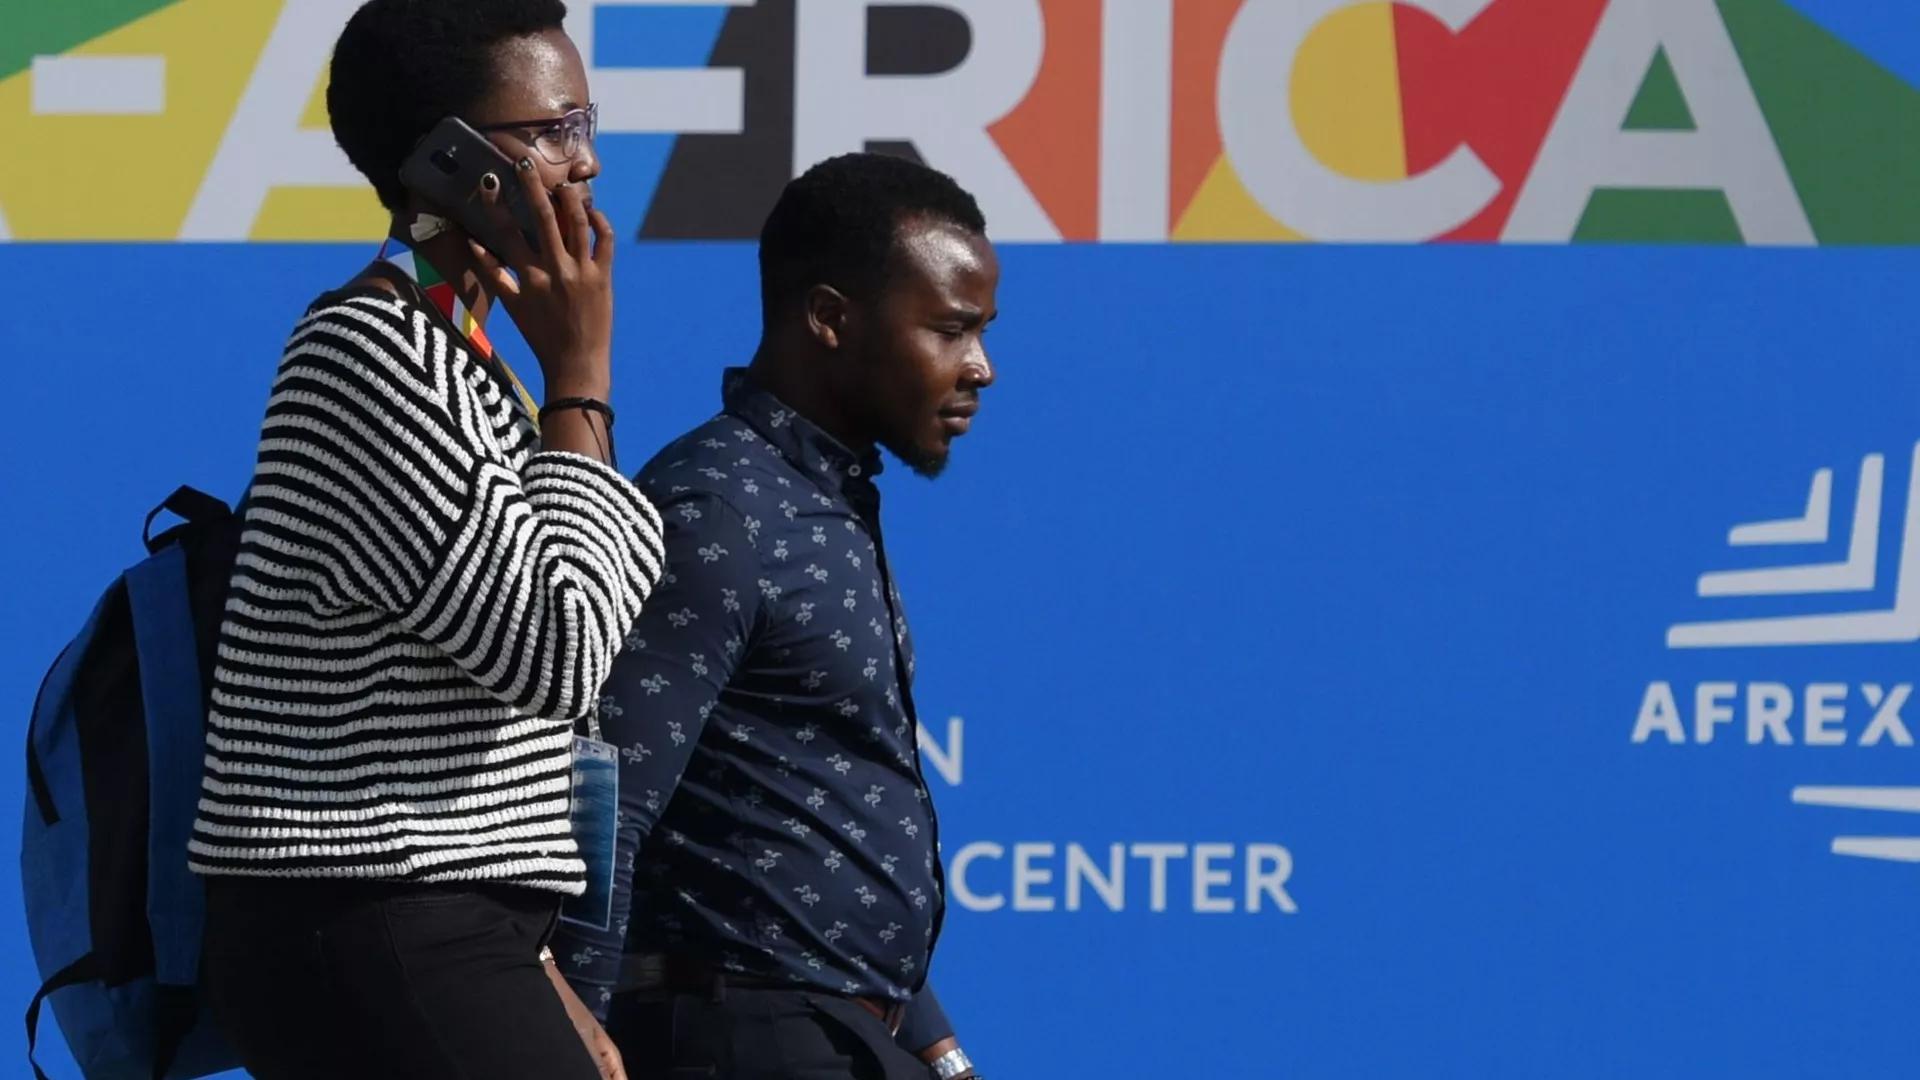 Russia-Africa Economic Forum to Take Place in St. Petersburg in Summer 2023